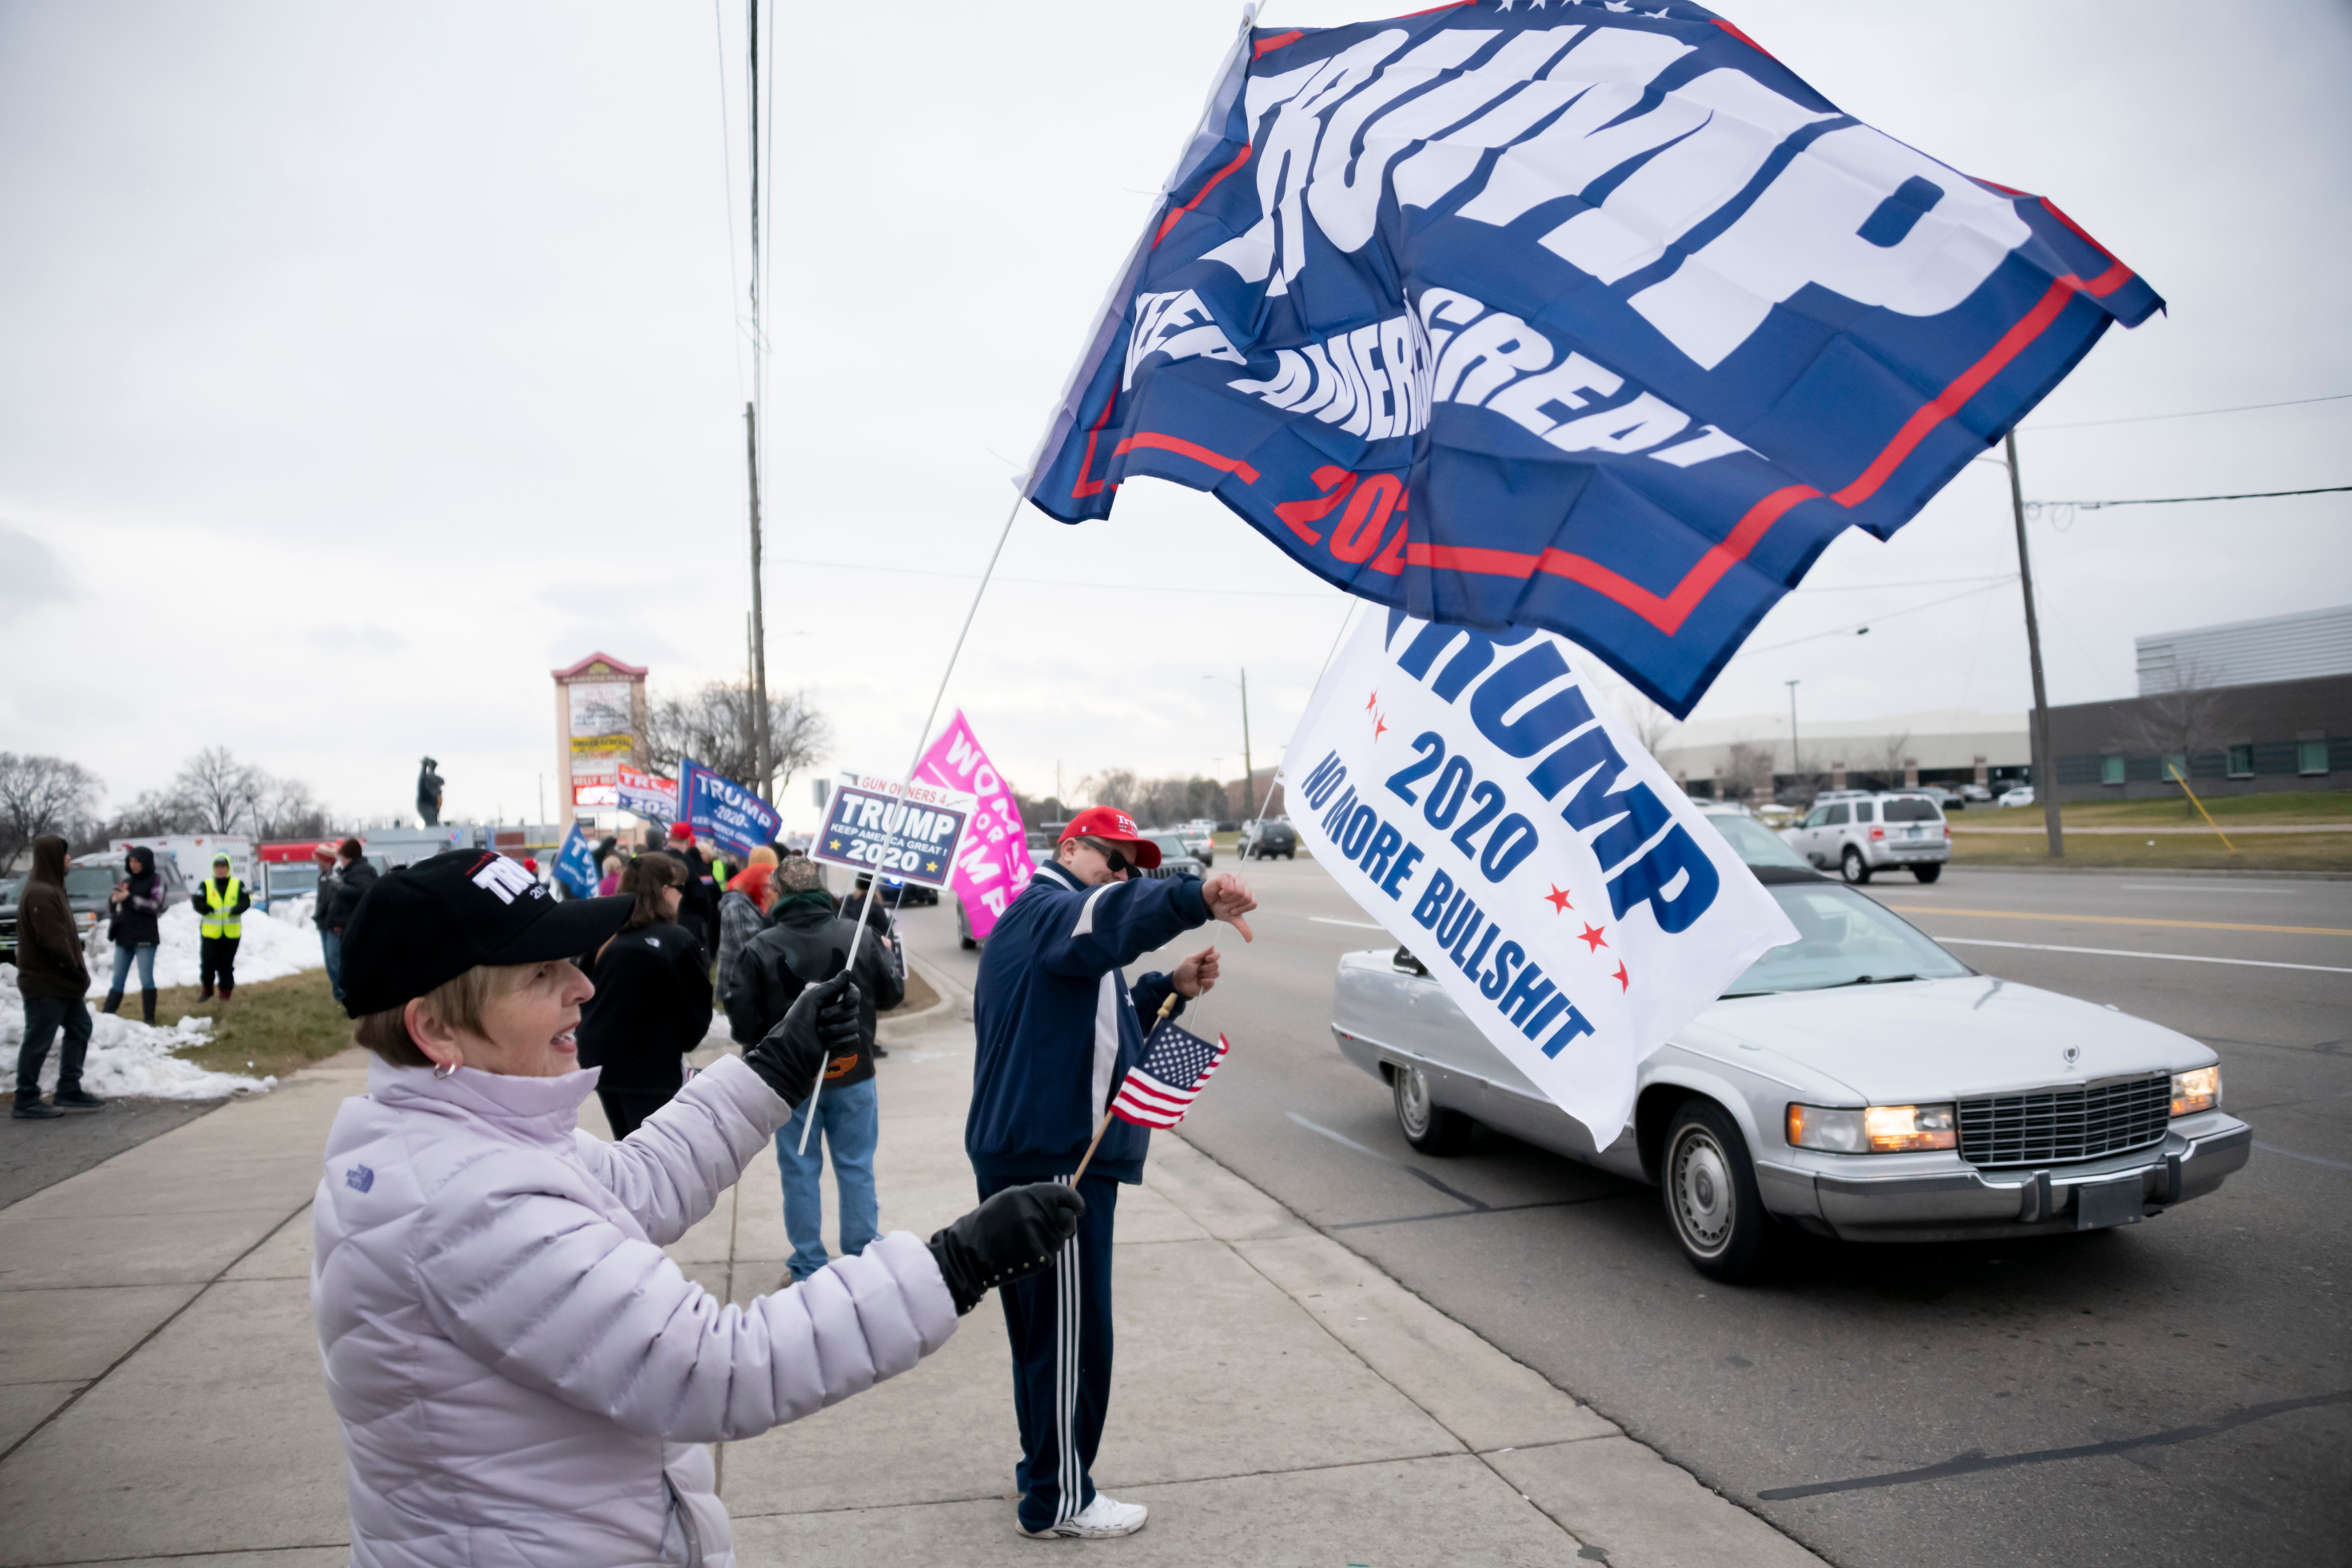 Supporters wave signs and flags while waiting along Van Dyke for the arrival of the President Trump.